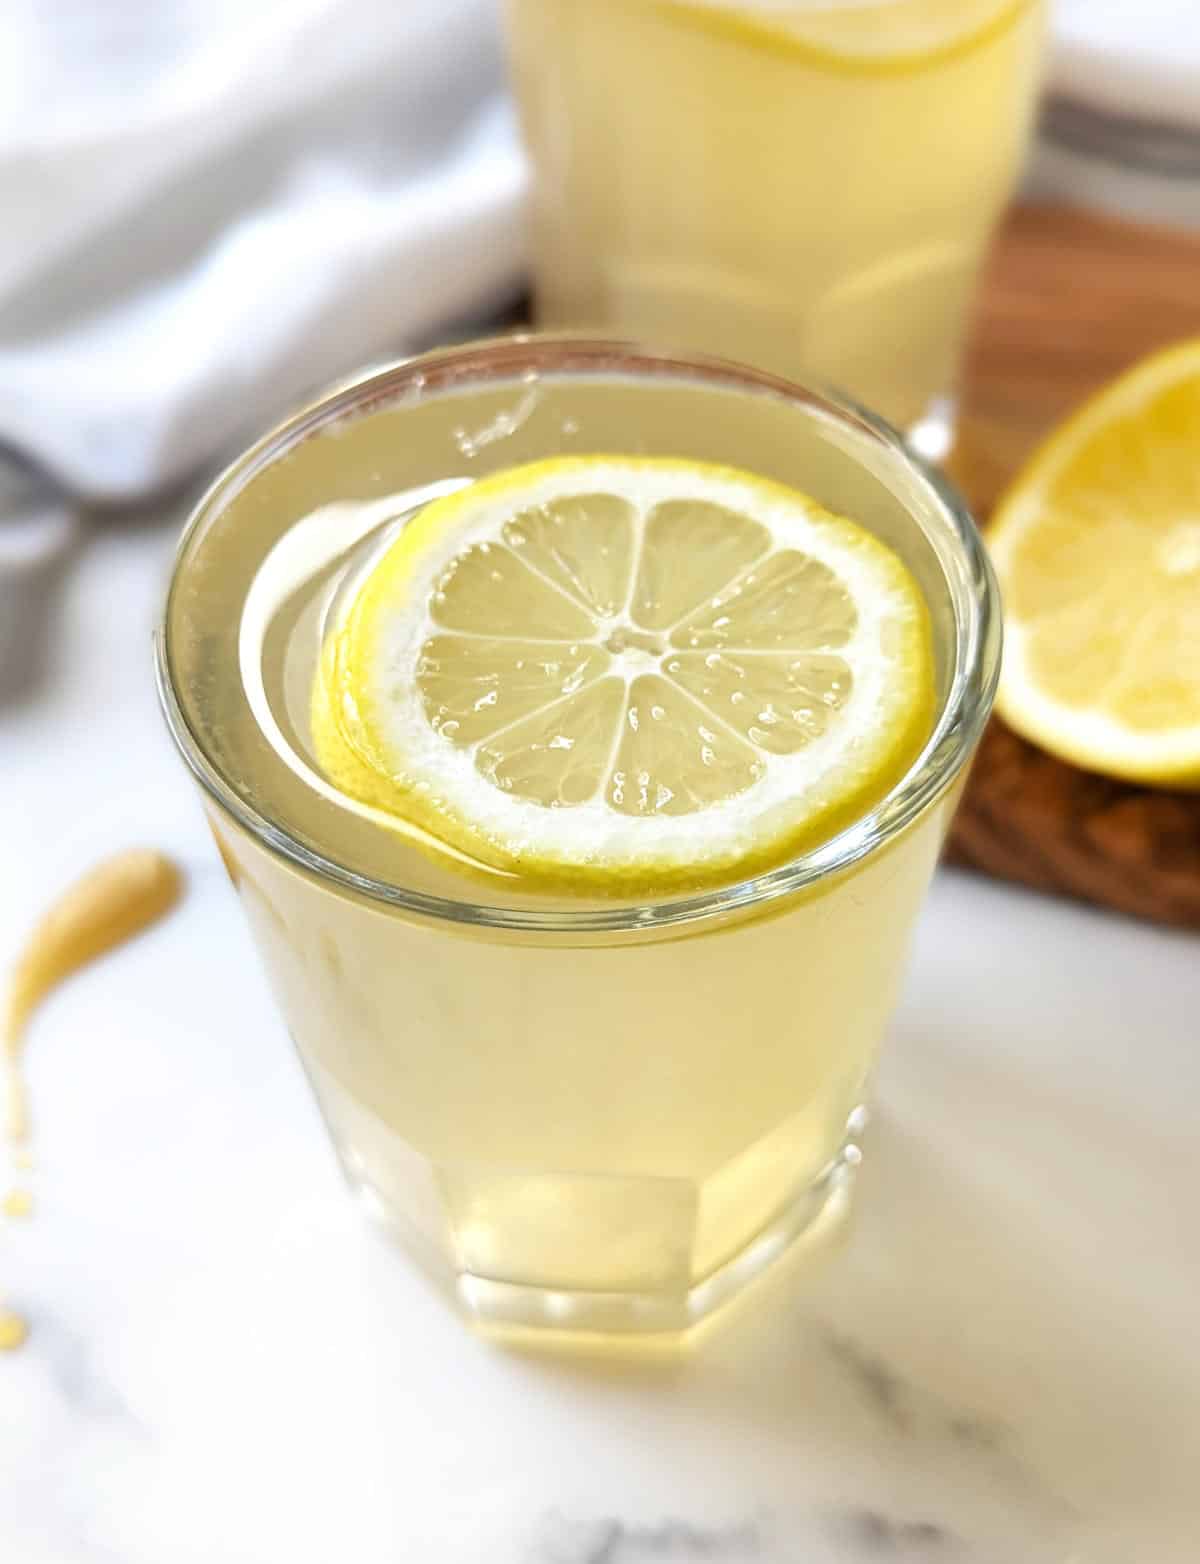 Apple cider vinegar and lemon juice in a glass, topped with a slice of lemon.